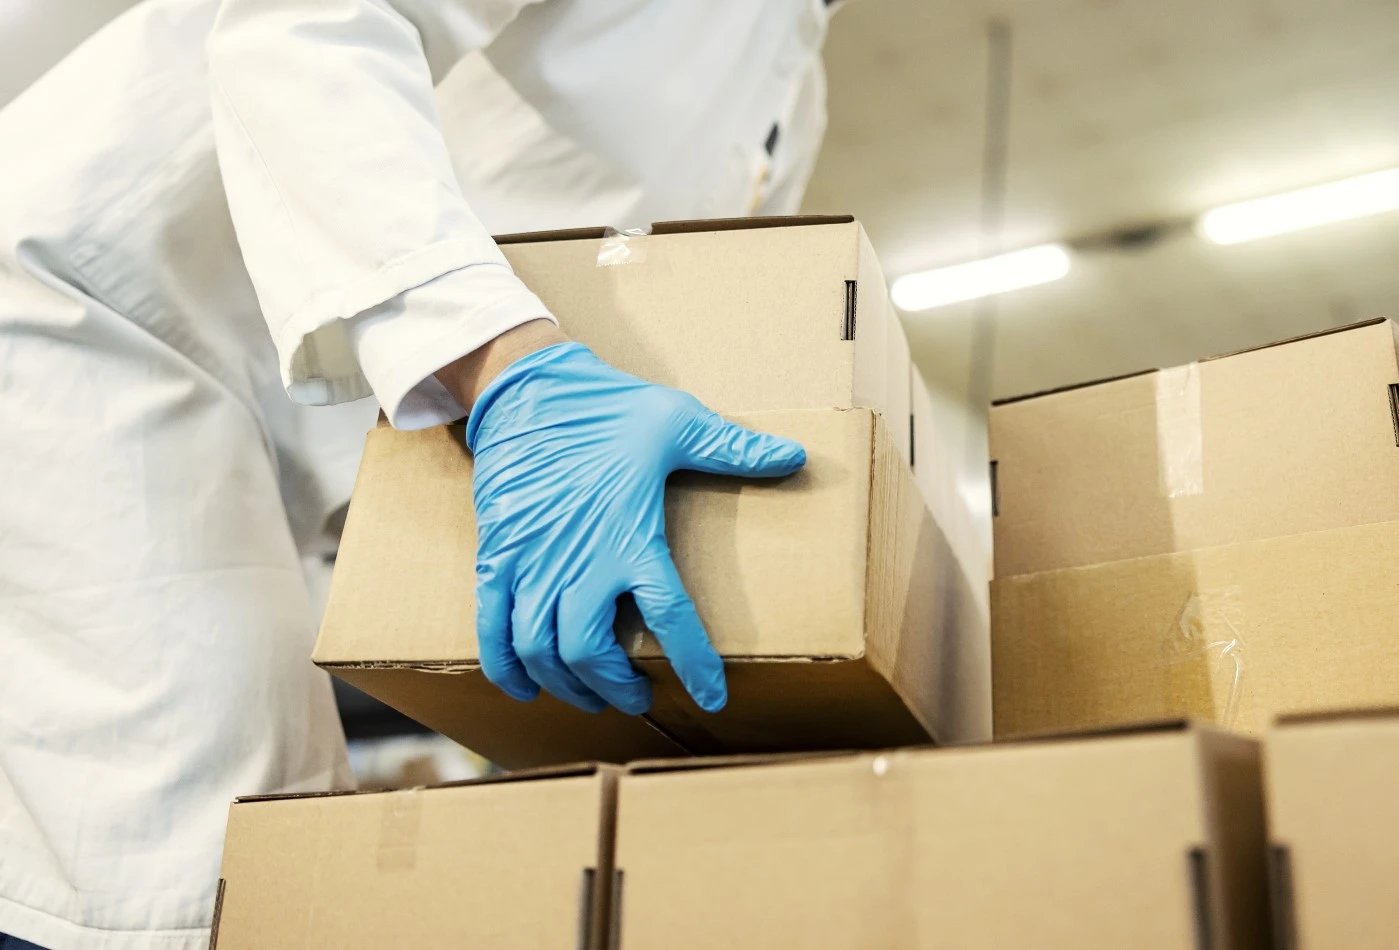 Plain brown box being picked up by woman wearing blue gloves and white lab coat